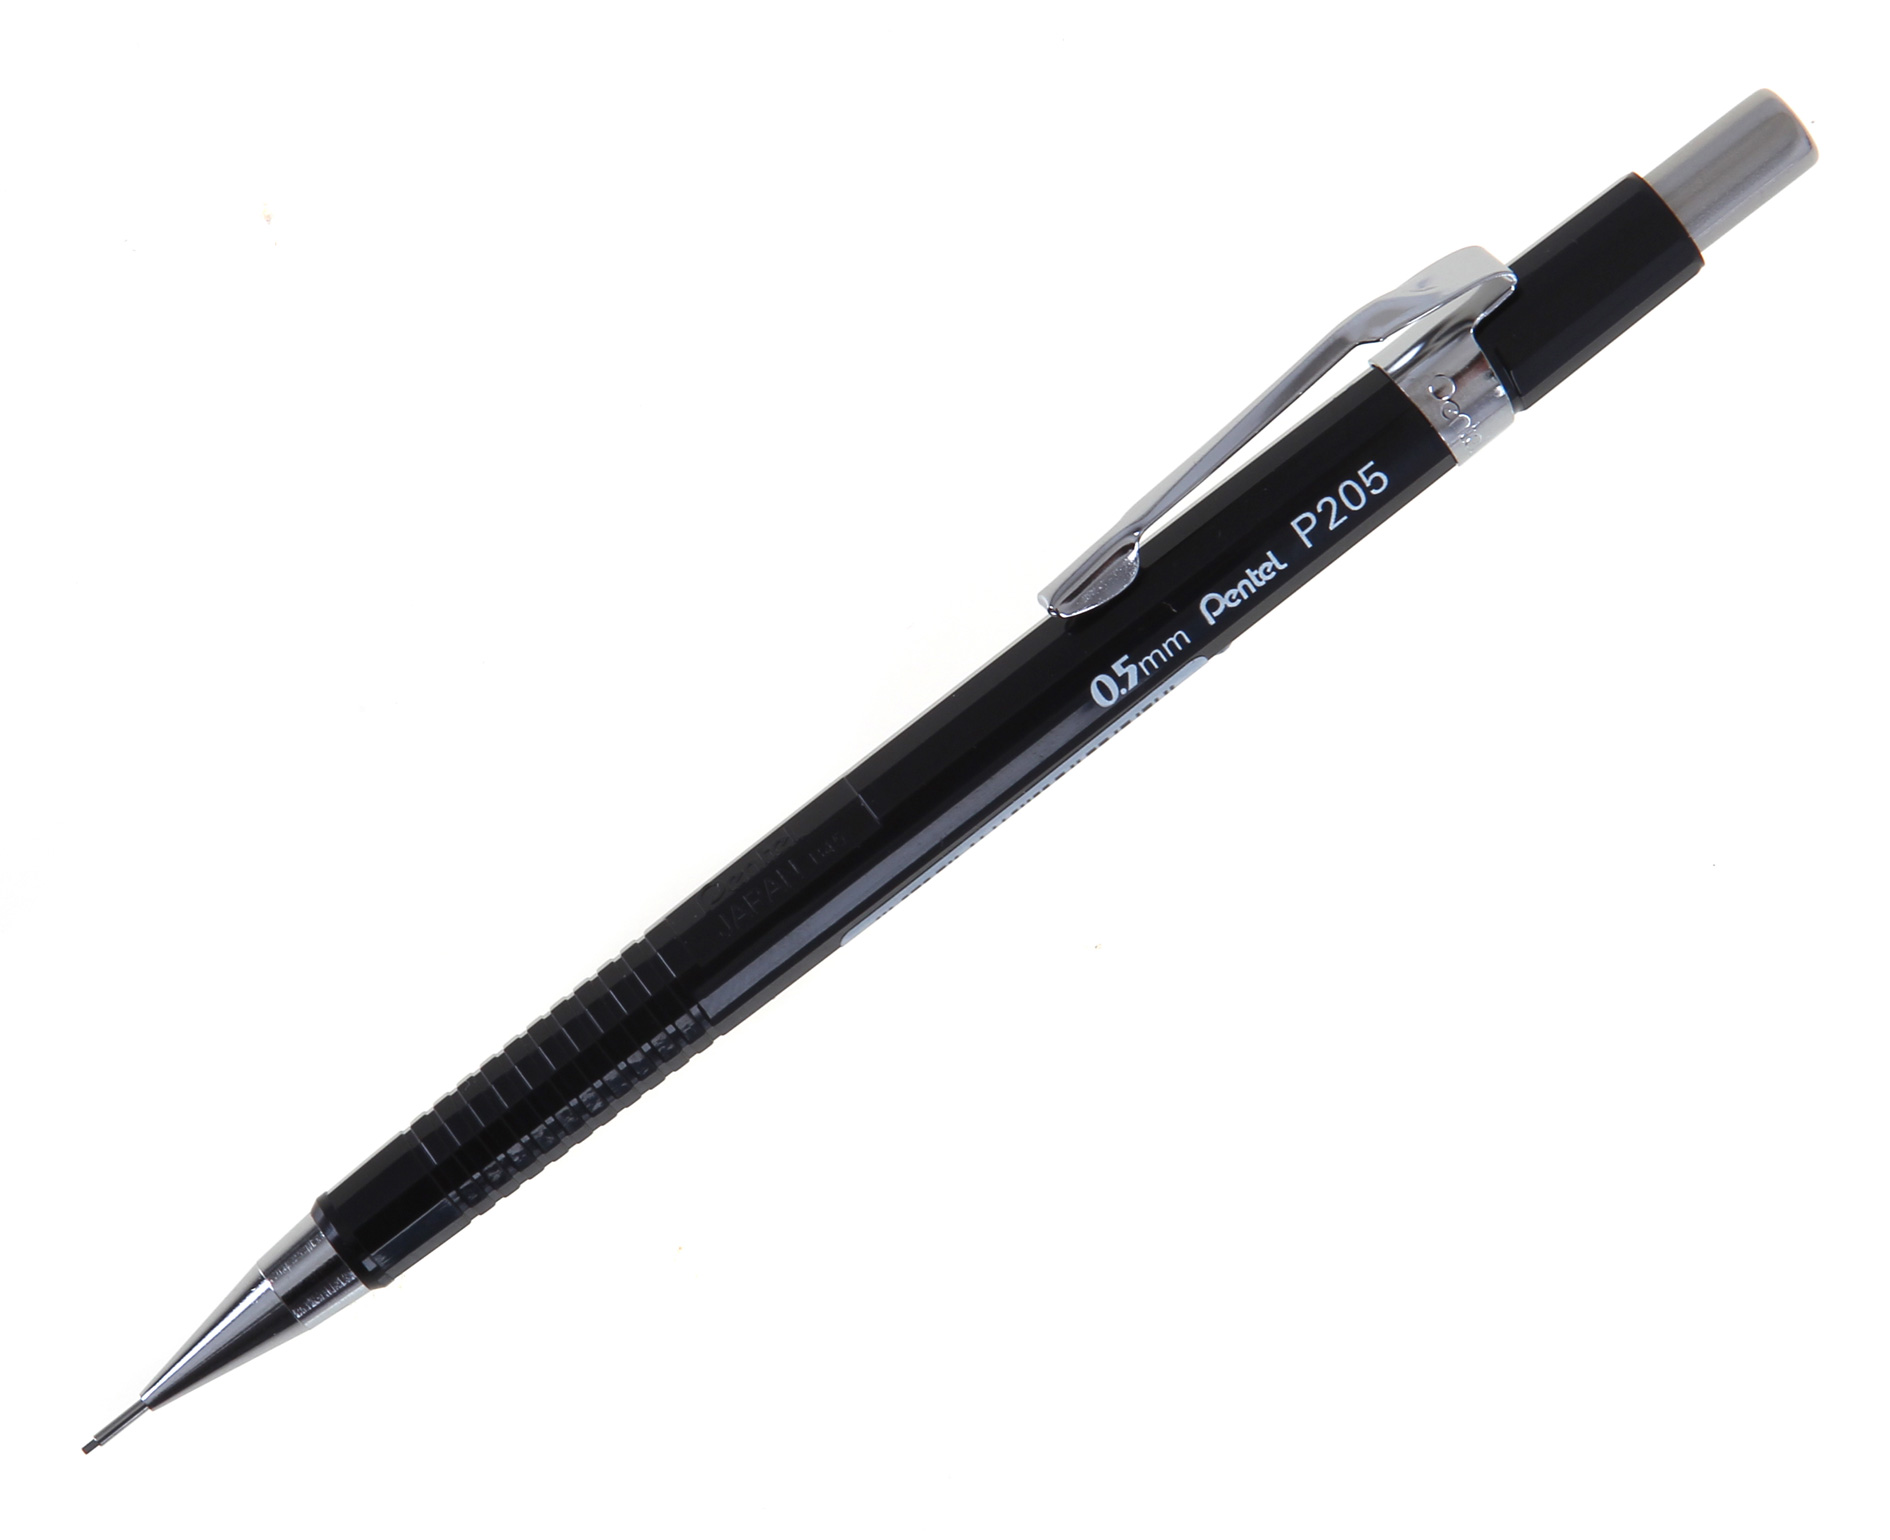     Key Features Are The Main Reasons Why These Pencils Are More Preferred